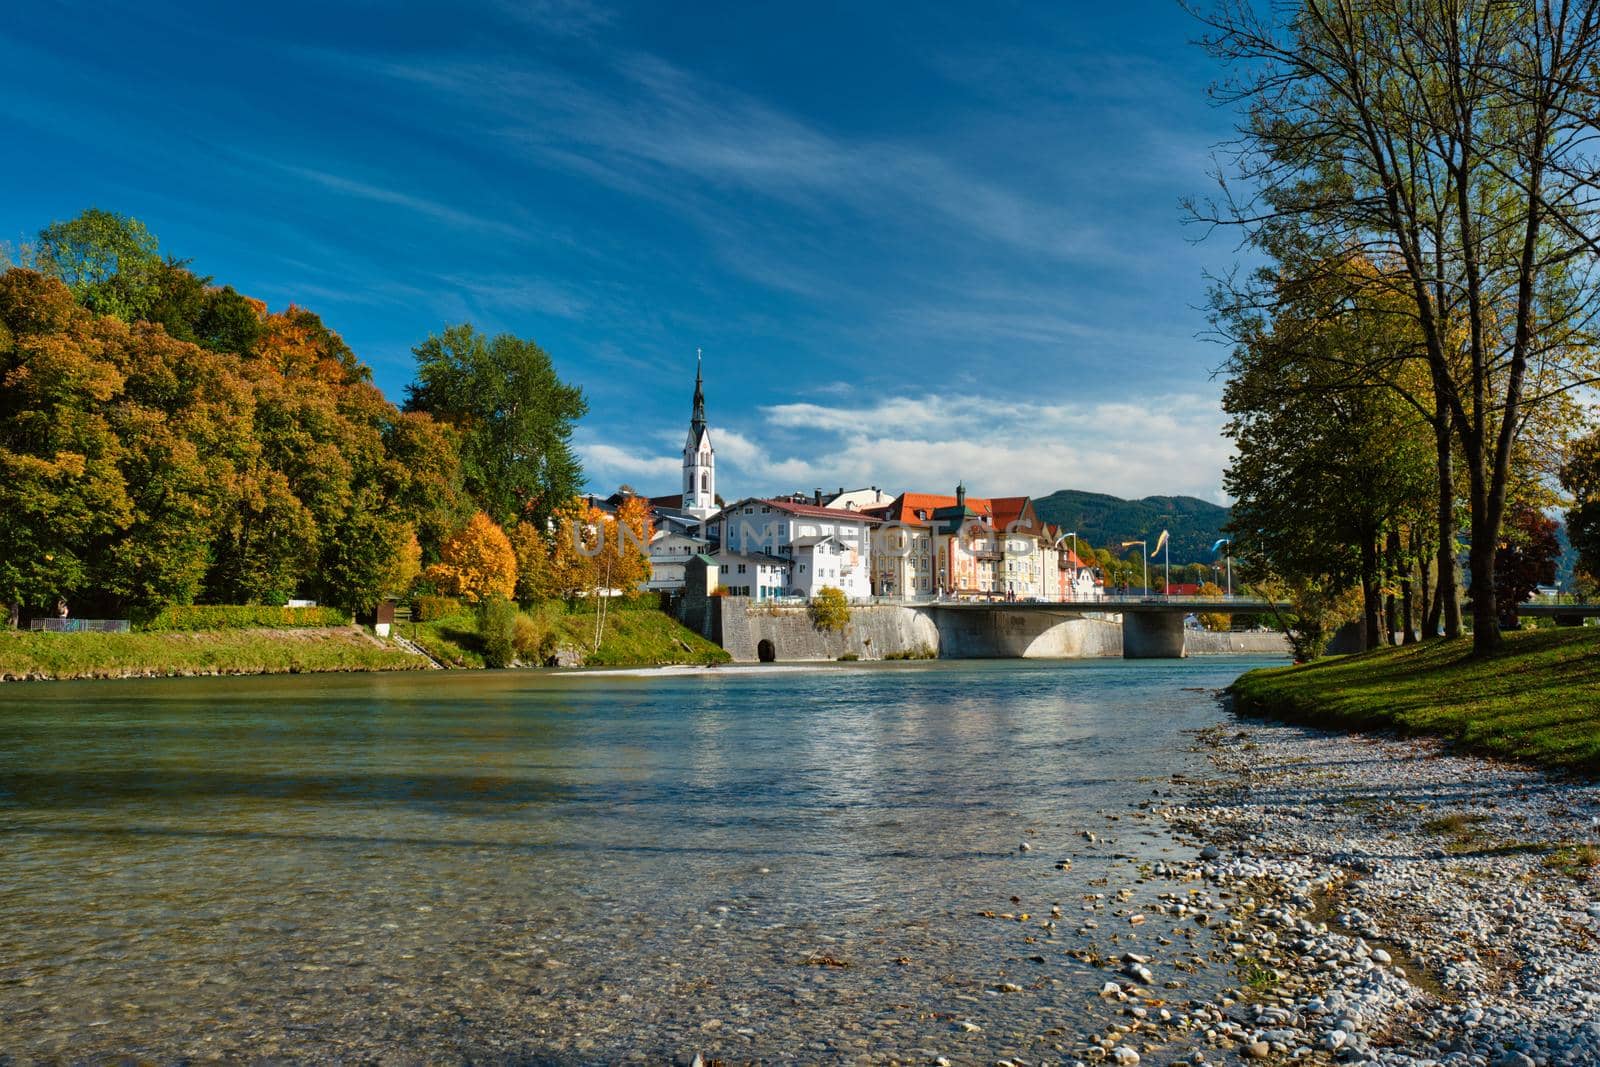 View of Bad Tolz - picturesque resort town in Bavaria, Germany in autumn and Isar river